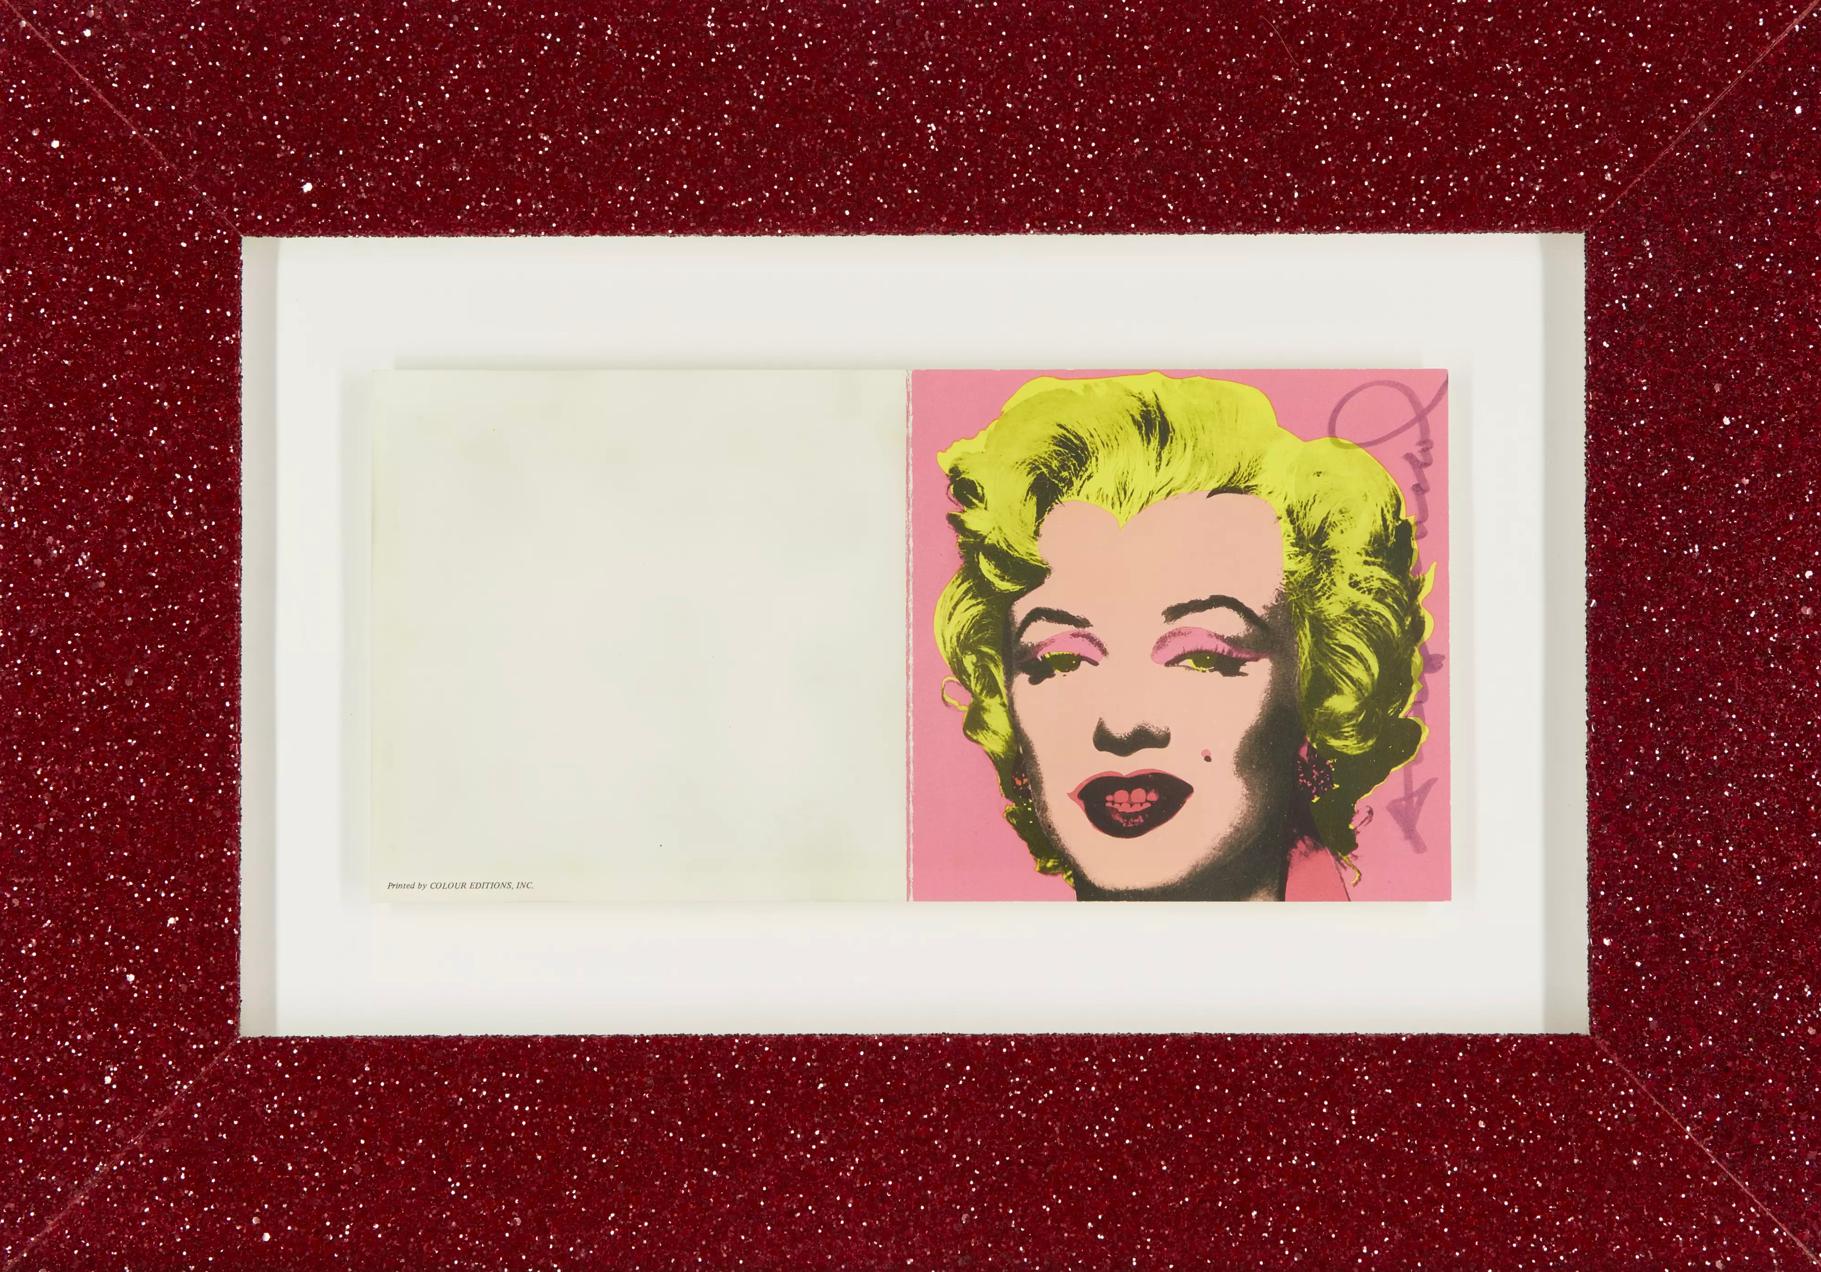 Nach Andy Warhol „Marilyn“ (Invitation) Farb Offset-Lithographie 1981 im Angebot 2